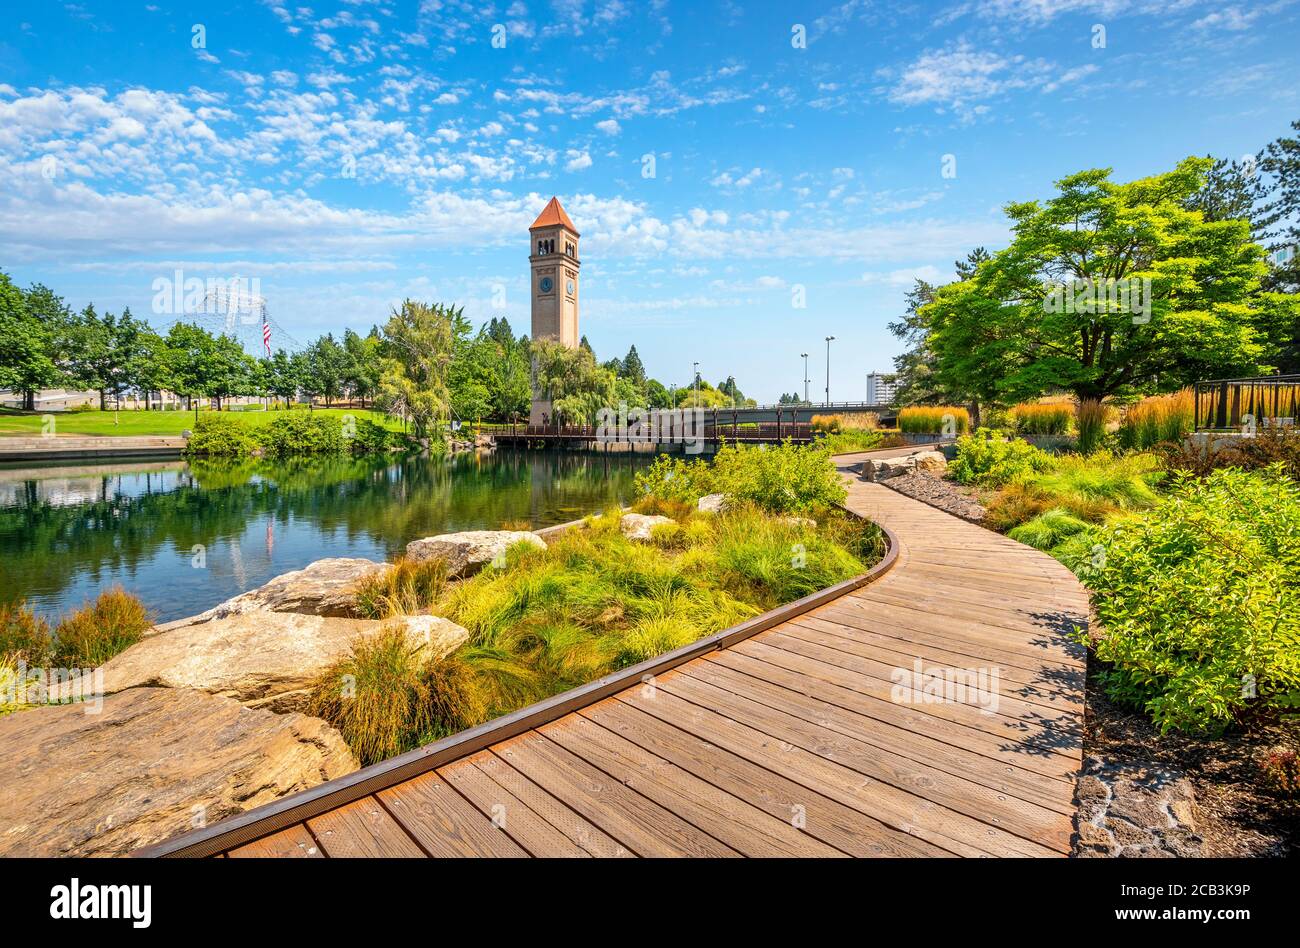 Summer day along the Spokane River in Riverfront Park with the Clock Tower, Pavilion and walking path in view. Stock Photo